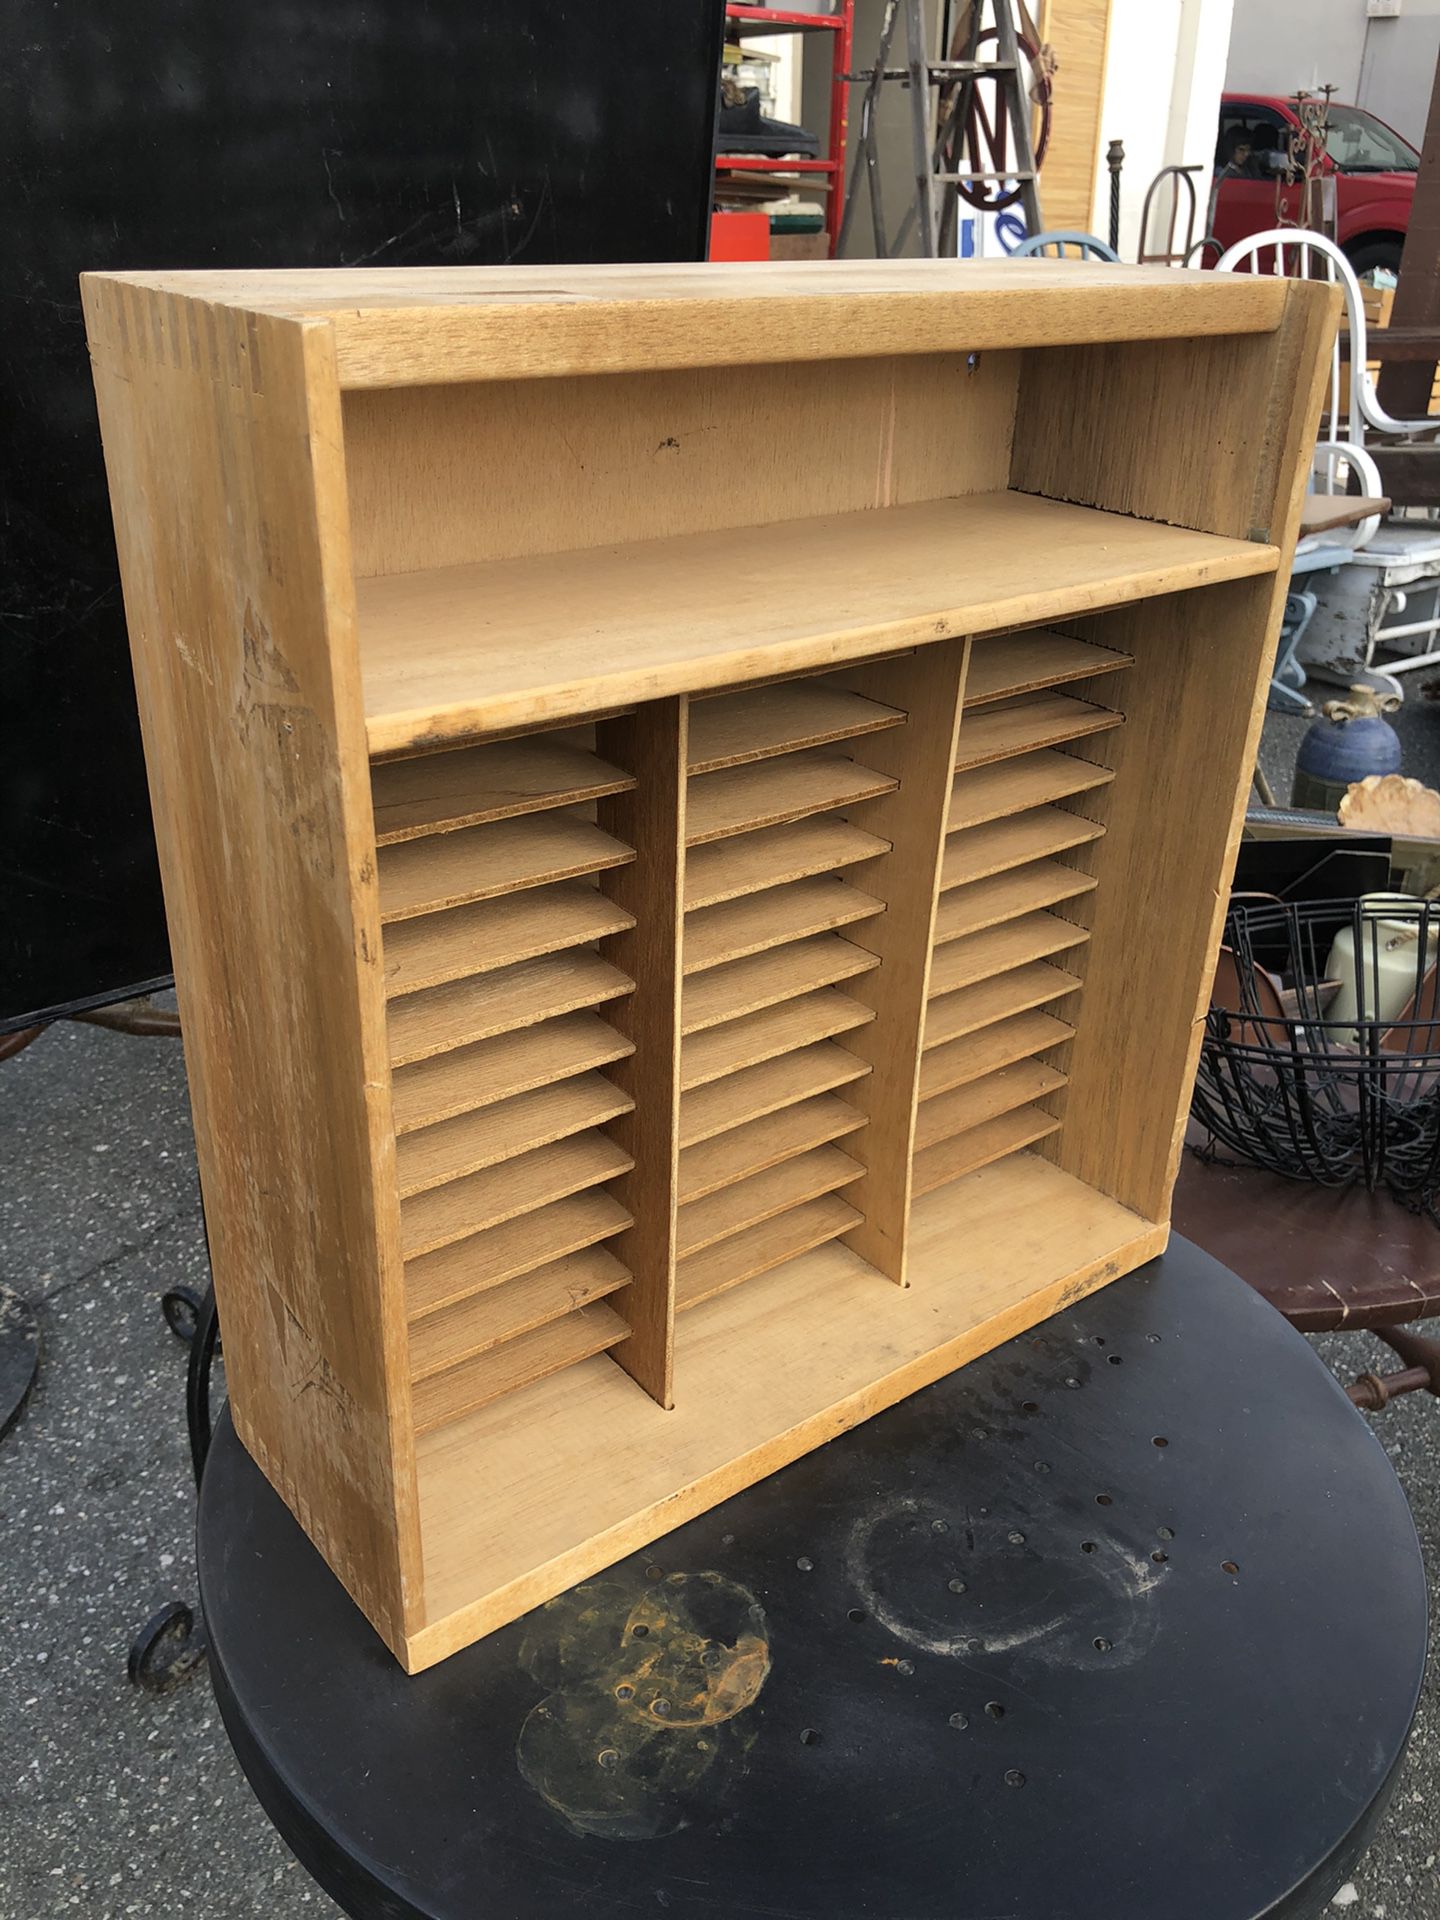 Small Wood Shelf with cubbies